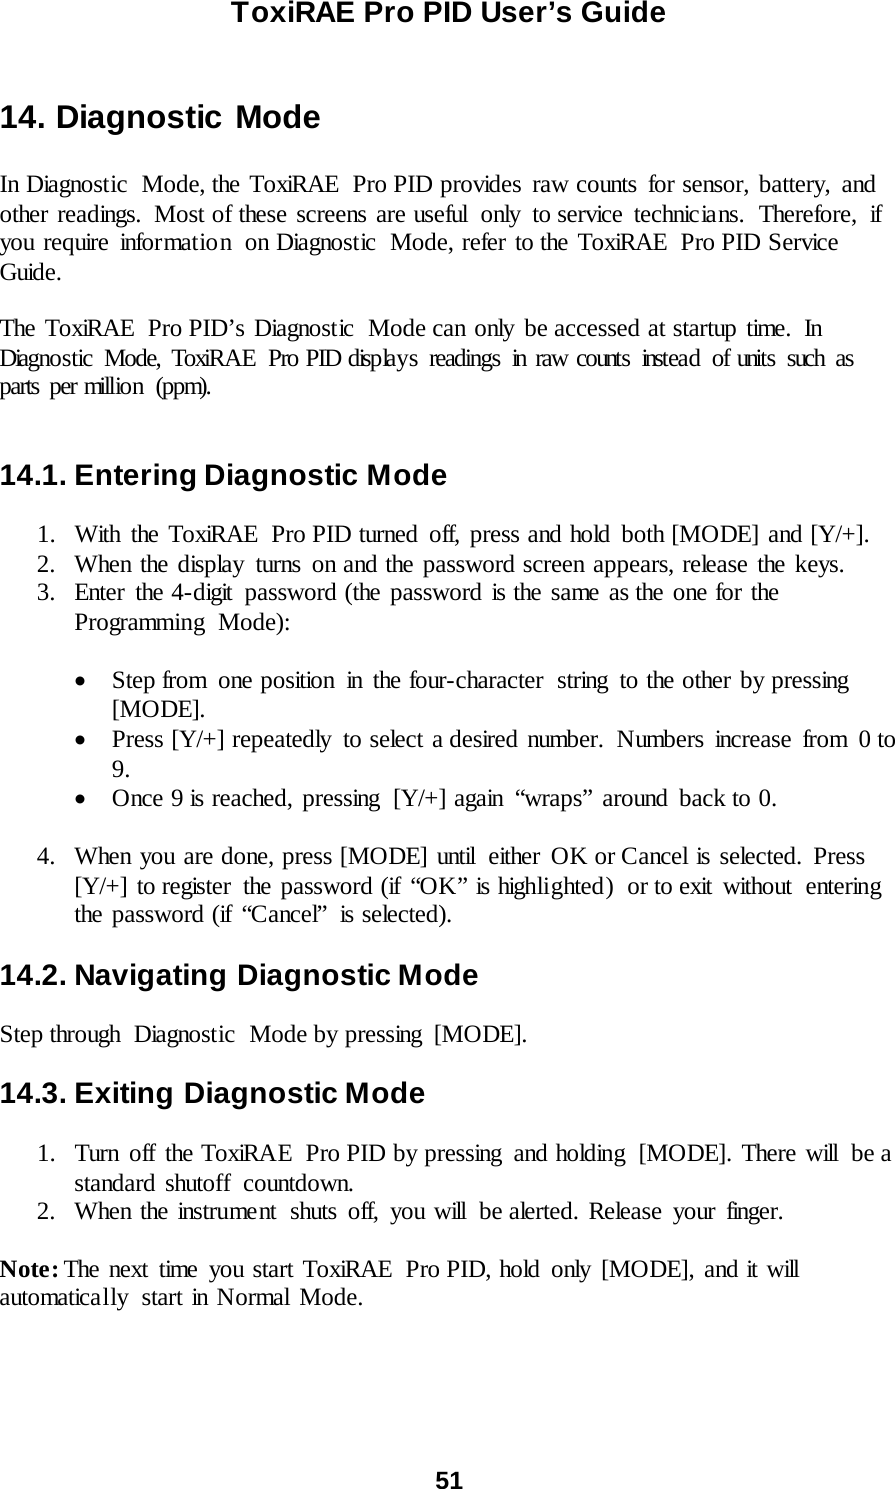 ToxiRAE Pro PID User’s Guide  51    14. Diagnostic Mode  In Diagnostic Mode, the ToxiRAE Pro PID provides raw counts for sensor, battery, and other readings.  Most of these screens are useful  only  to service technicians.  Therefore,  if you require information  on Diagnostic  Mode, refer to the ToxiRAE  Pro PID Service Guide.  The ToxiRAE  Pro PID’s Diagnostic  Mode can only  be accessed at startup time.  In Diagnostic Mode, ToxiRAE  Pro PID displays readings in raw counts instead of units such as parts per million (ppm).     14.1. Entering Diagnostic Mode  1. With the ToxiRAE  Pro PID turned off, press and hold both [MODE] and [Y/+]. 2. When the display turns on and the password screen appears, release the keys. 3. Enter the 4-digit password (the password is the same as the one for the Programming Mode):   • Step from  one position  in the four-character  string  to the other by pressing [MODE].  • Press [Y/+] repeatedly  to select a desired number.  Numbers increase from  0 to 9.  • Once 9 is reached, pressing  [Y/+] again  “wraps”  around  back to 0.  4. When you are done, press [MODE] until  either OK or Cancel is selected. Press [Y/+] to register  the password (if “OK” is highlighted)  or to exit  without  entering the password (if “Cancel”  is selected).    14.2. Navigating Diagnostic Mode  Step through  Diagnostic  Mode by pressing  [MODE].  14.3. Exiting Diagnostic Mode  1. Turn off the ToxiRAE  Pro PID by pressing and holding  [MODE]. There will  be a standard shutoff  countdown. 2. When the instrument shuts off, you will be alerted. Release your finger.  Note: The next time you start ToxiRAE  Pro PID, hold only [MODE], and it will automatically  start in Normal Mode.  